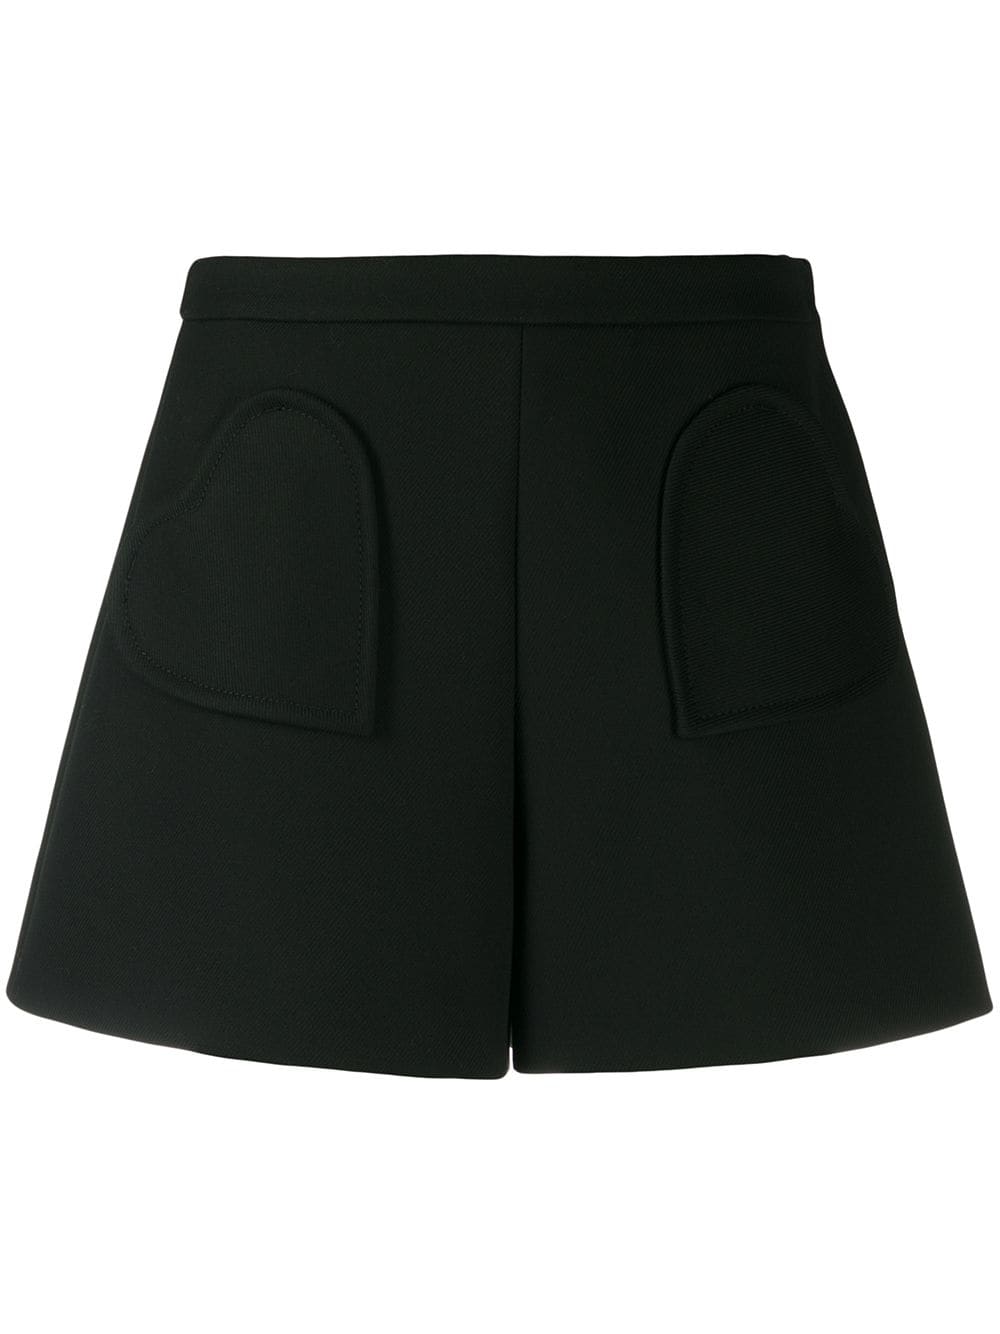 Red Valentino - Heart-Pocket Shorts | ABOUT ICONS